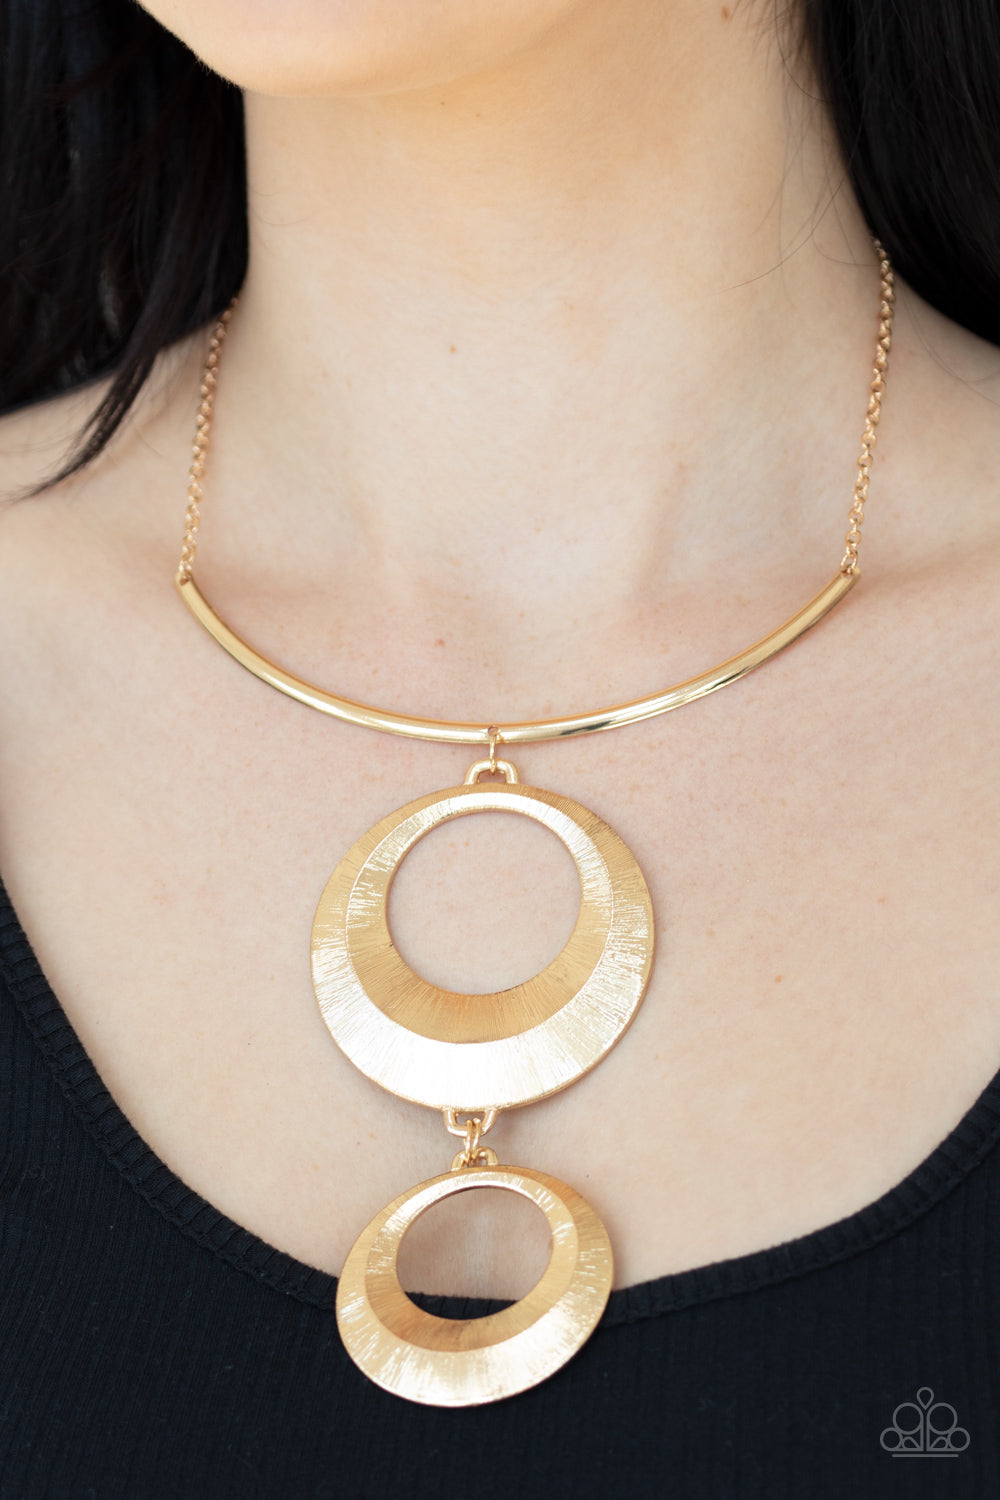 Egyptian Eclipse Gold Necklace - Daria's Blings N Things